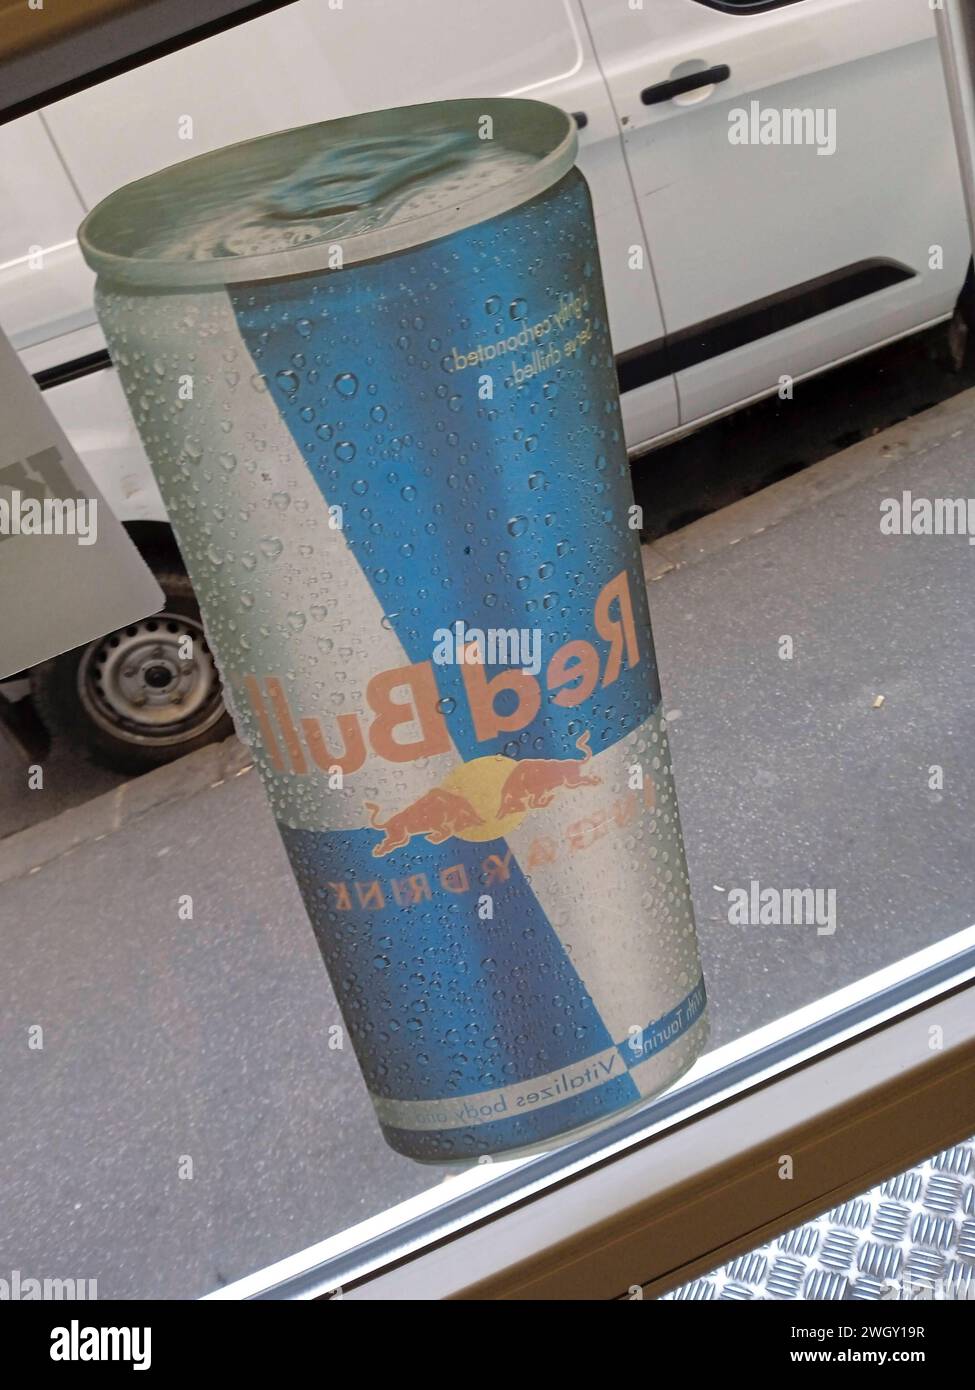 redbull is a very well known soft drink redbull a well known soft drink Stock Photo